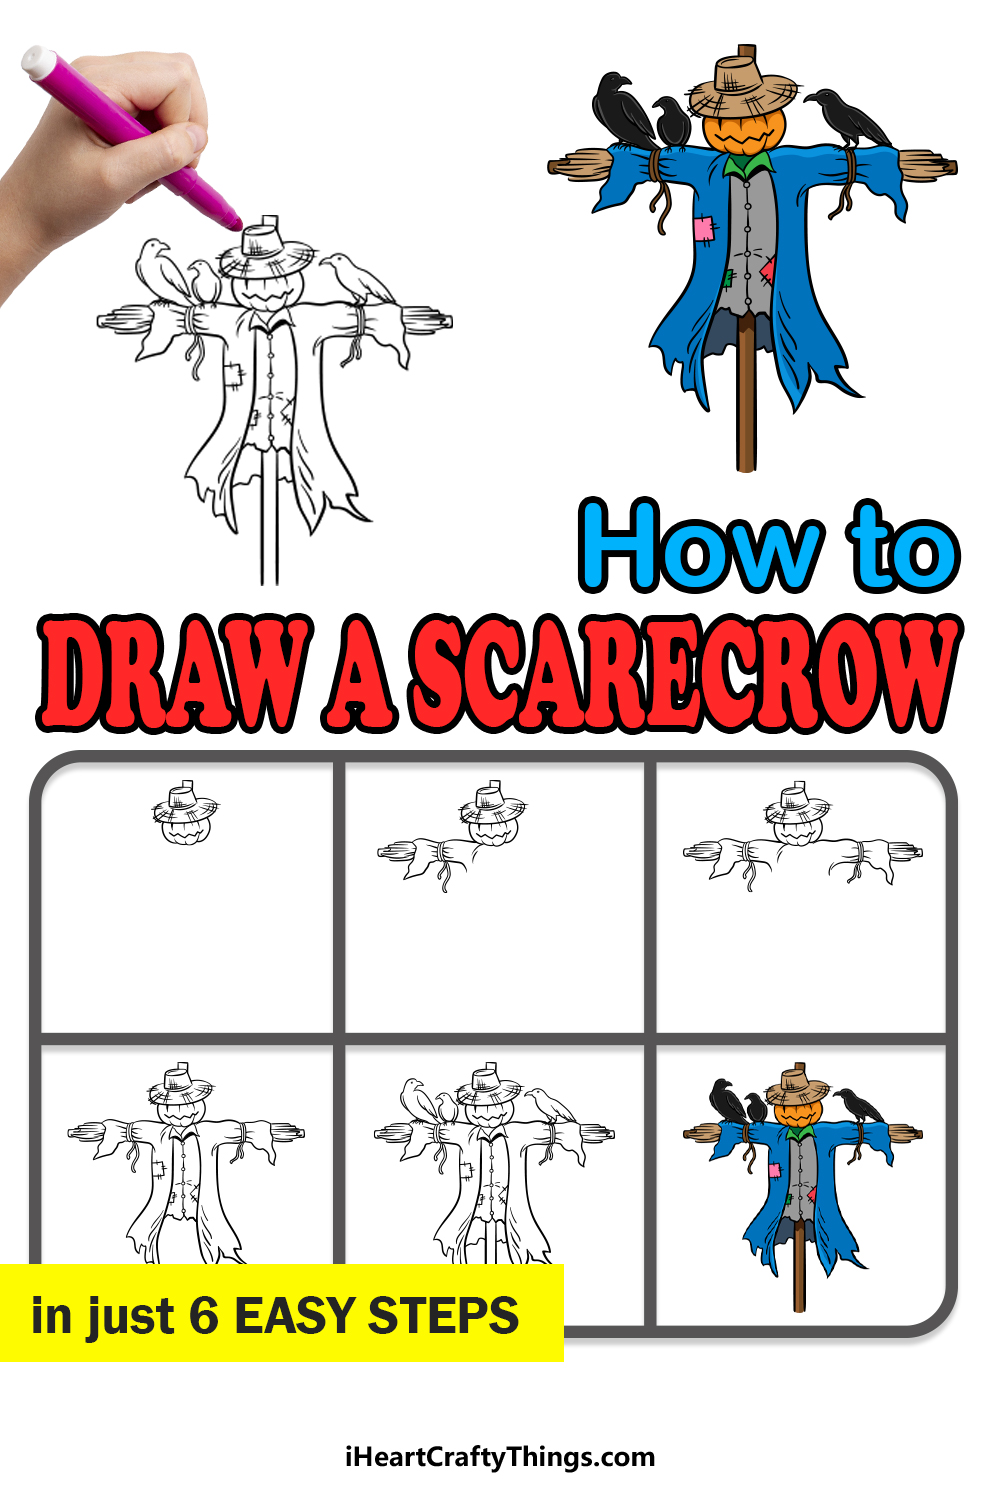 how to draw a scarecrow in 6 easy steps